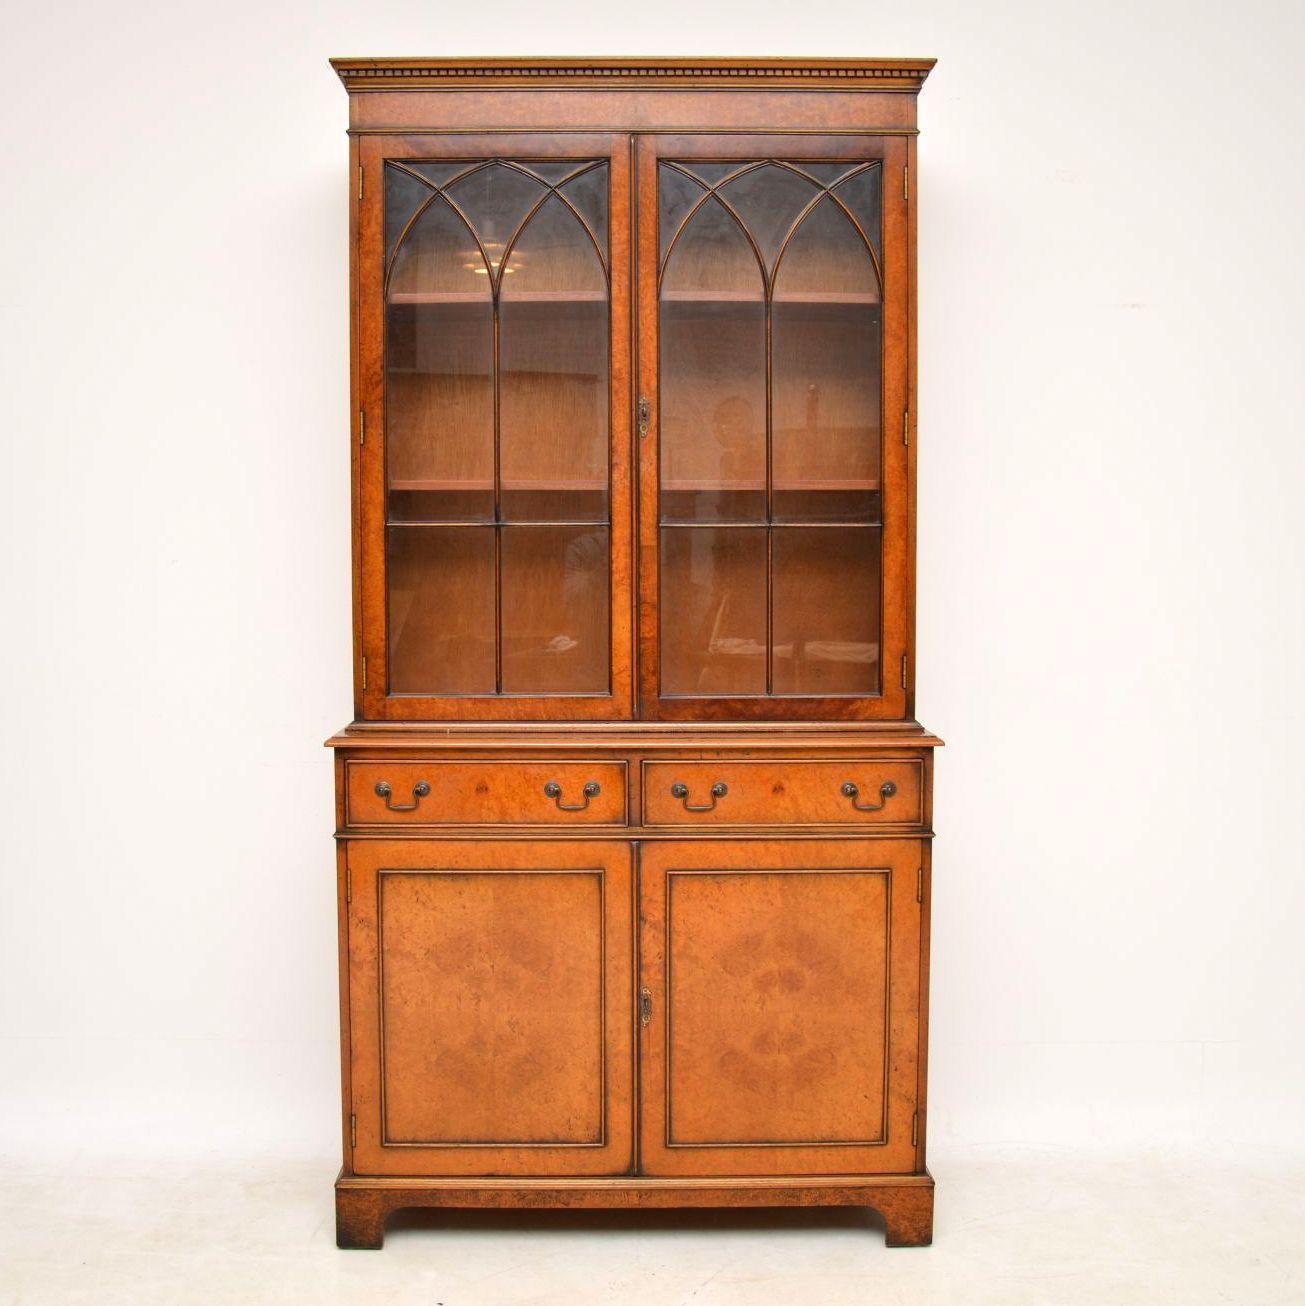 Burr walnut two section bookcase in good original condition, with a lovely mellow color and dating from around the 1950s period. It’s antique Georgian style with a dental moulded cornice, astral glazed top doors, two drawers below and two panelled